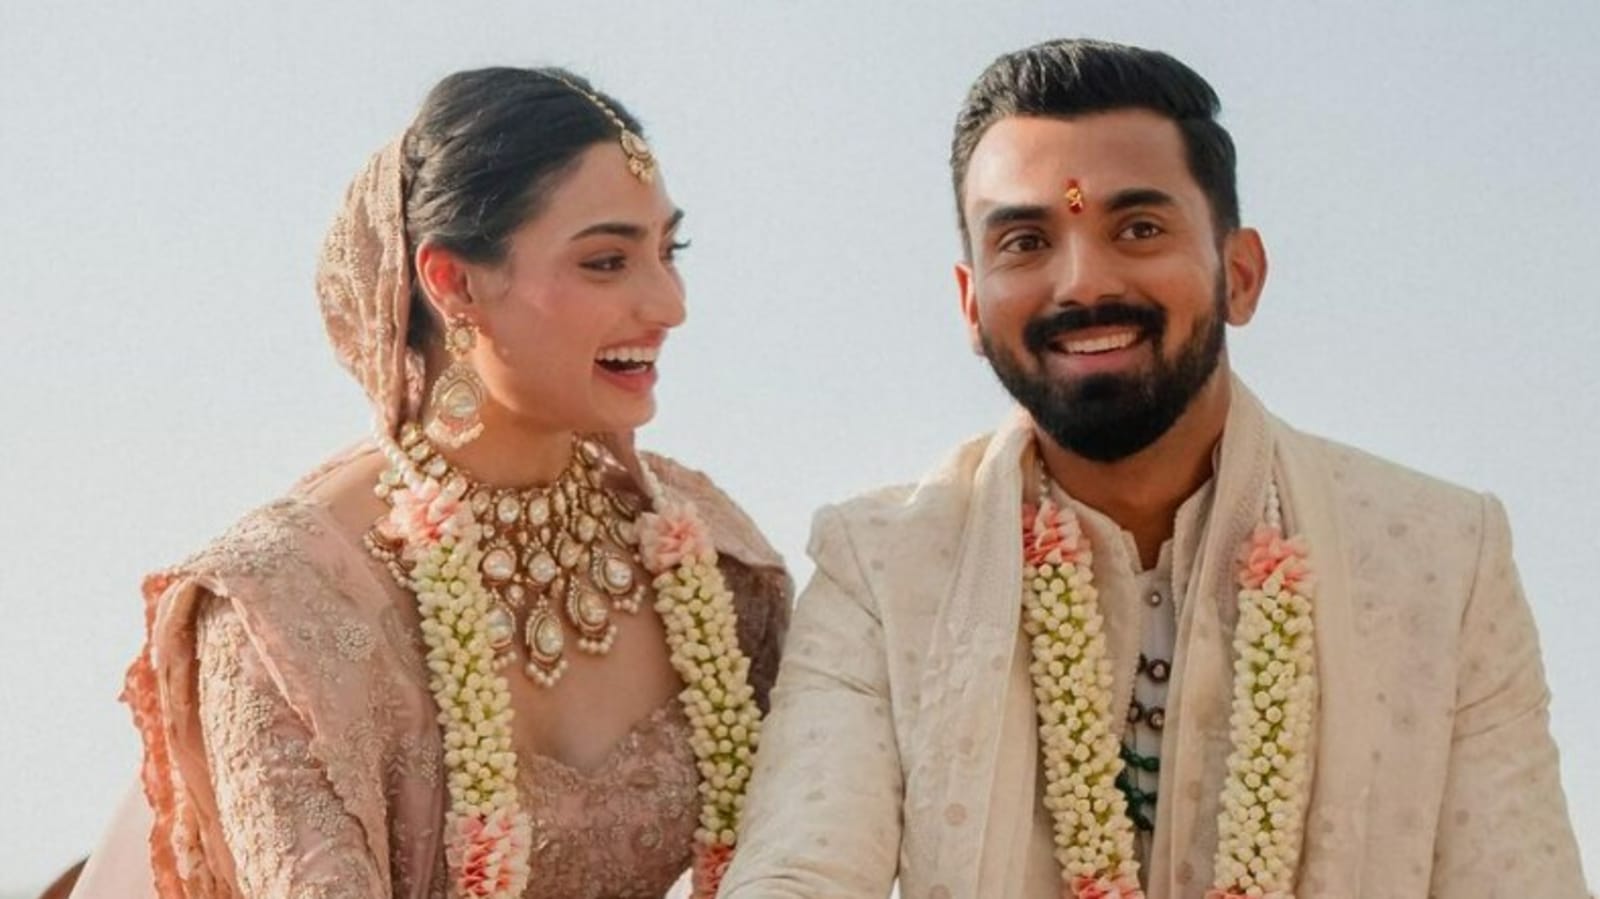 Athiya Shetty, KL Rahul share first official wedding pics, look beautiful as bride and groom. See here